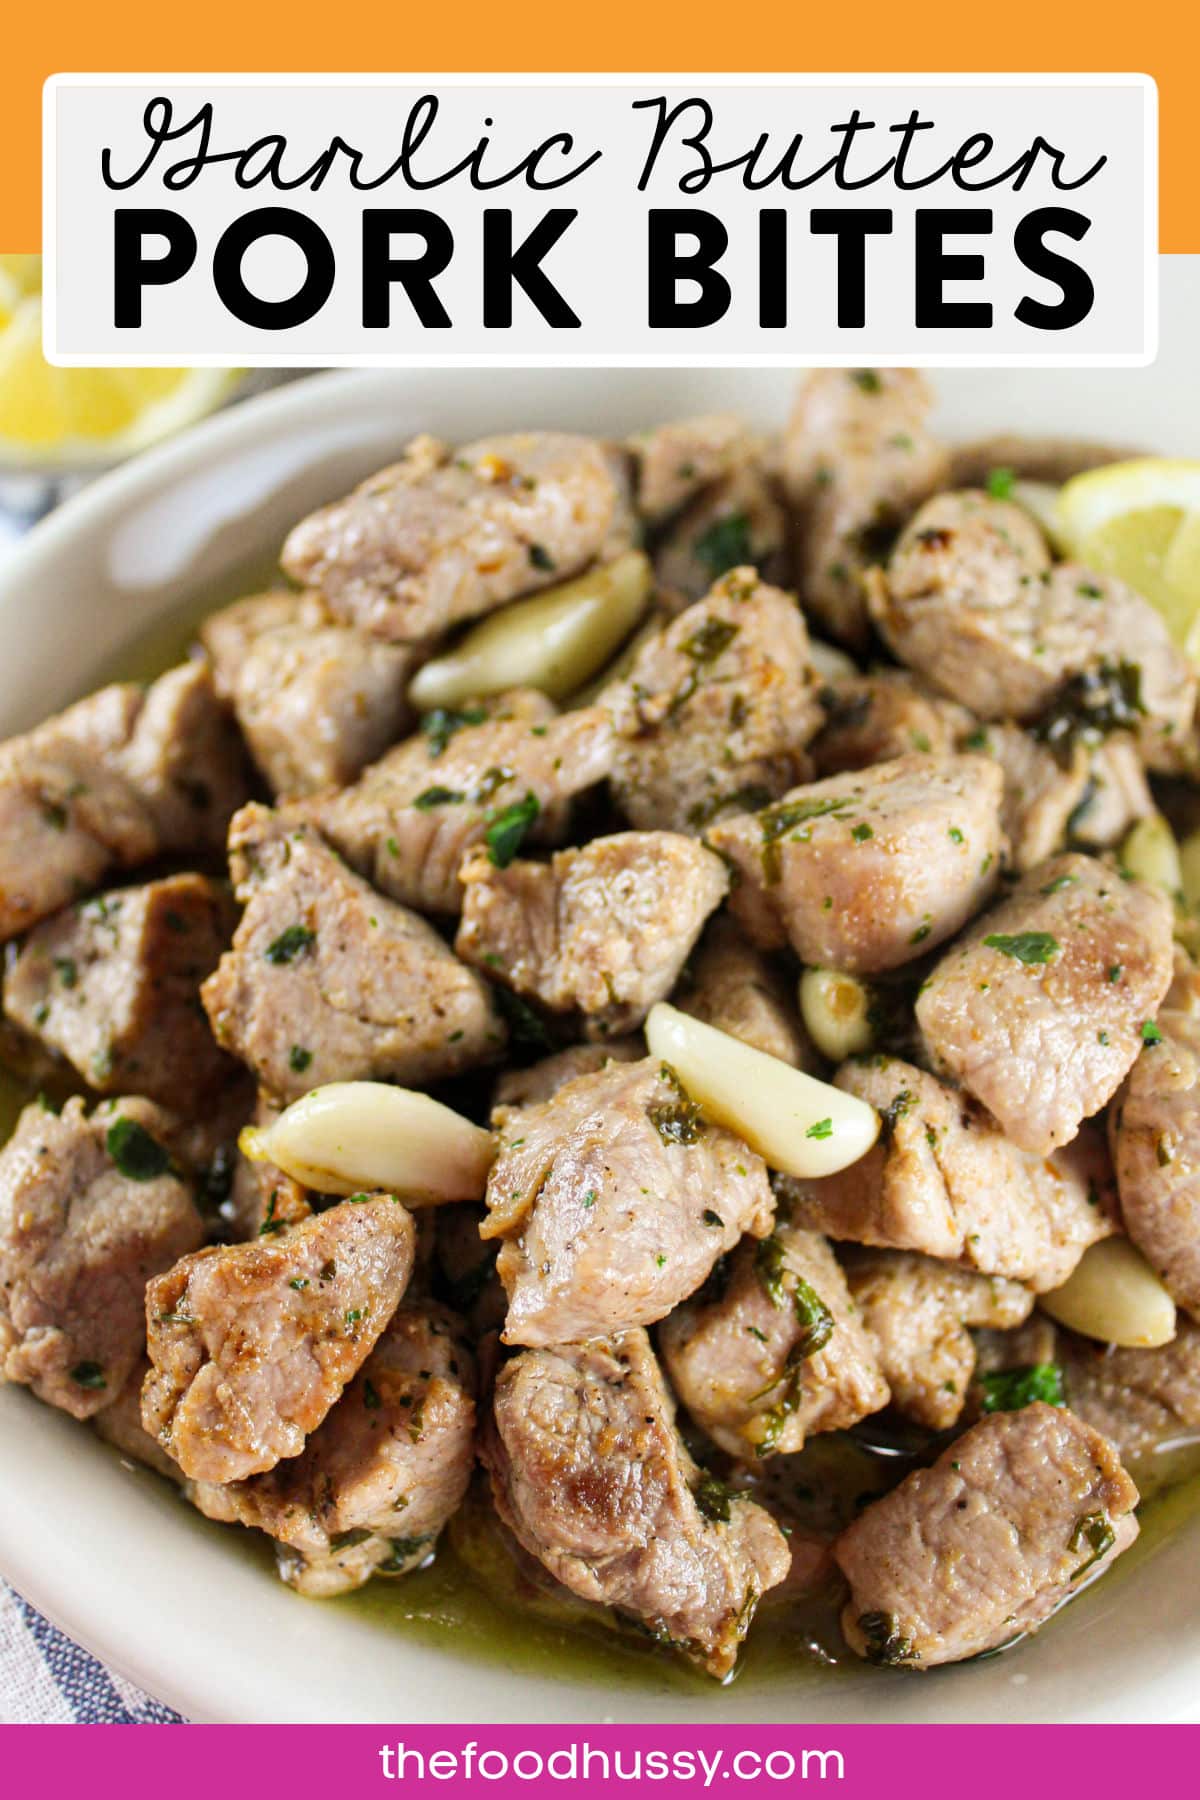 Garlic Butter Pork Bites are so easy to make and wow - they are delicious! Tender, juicy bites of pork smothered in a garlic butter sauce. Fresh herbs and lemon add freshness to every bite! via @foodhussy